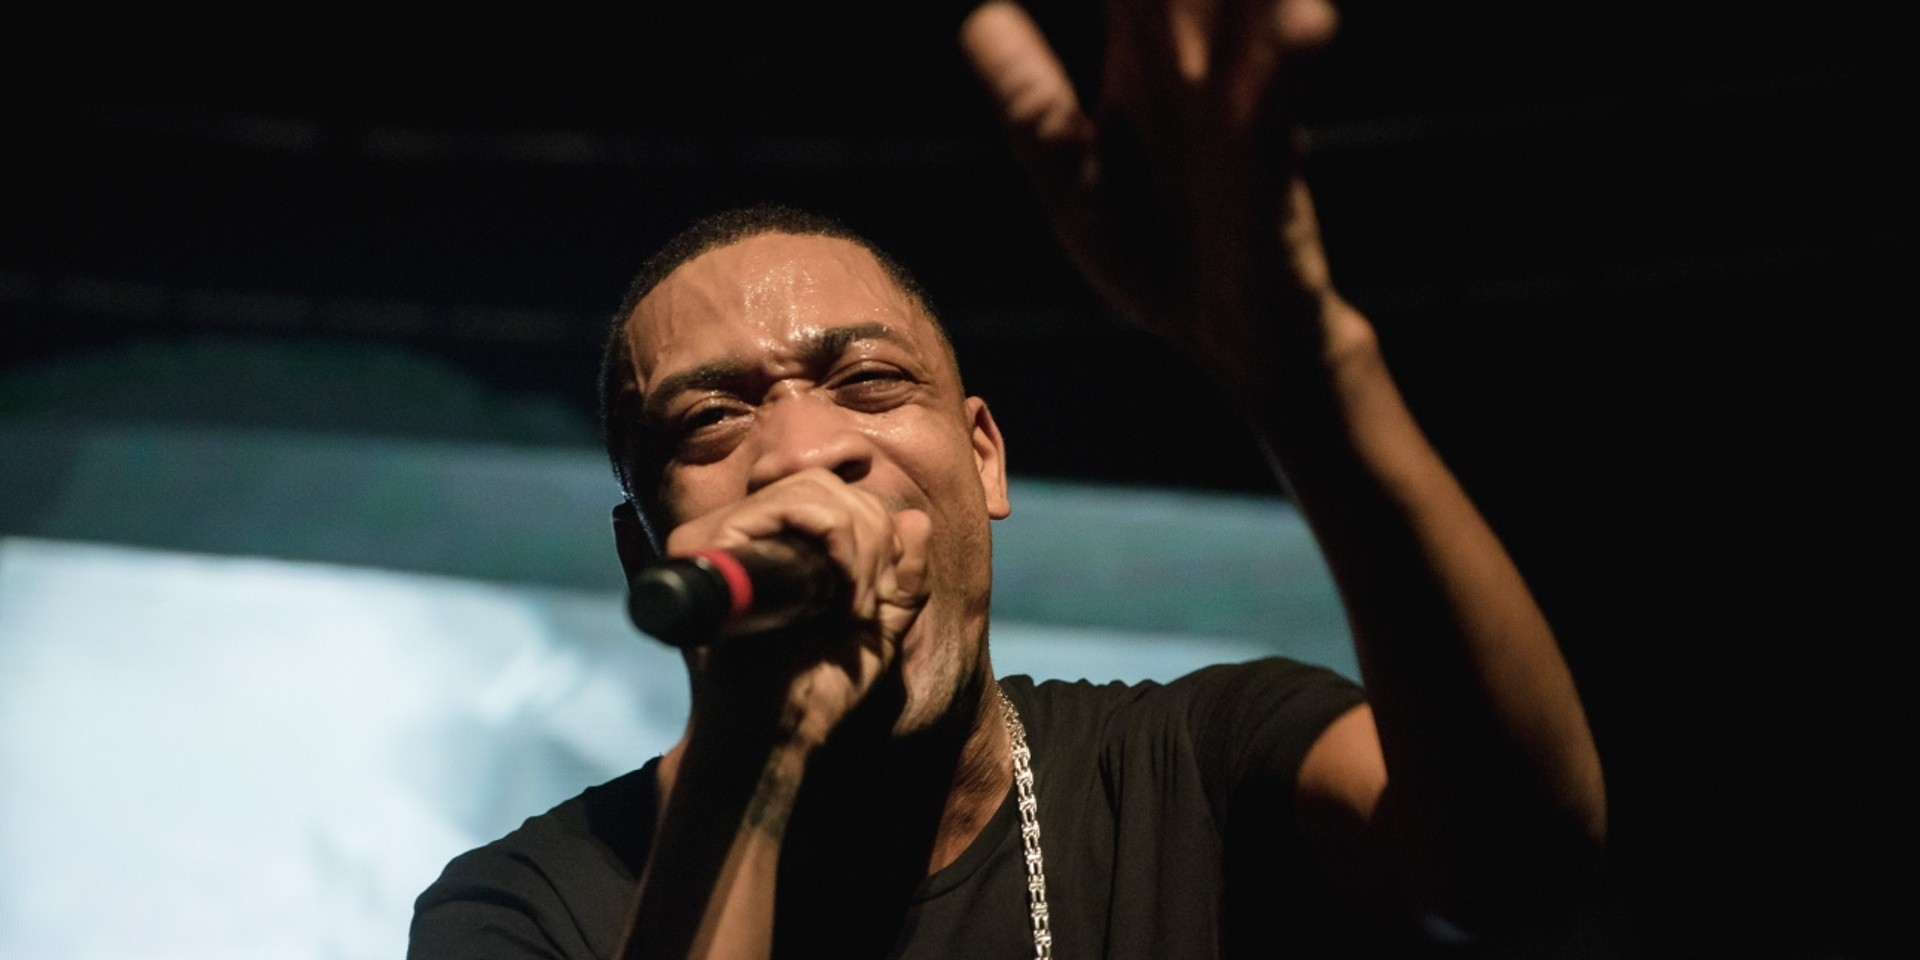 Wiley announces new album, The Godfather 3